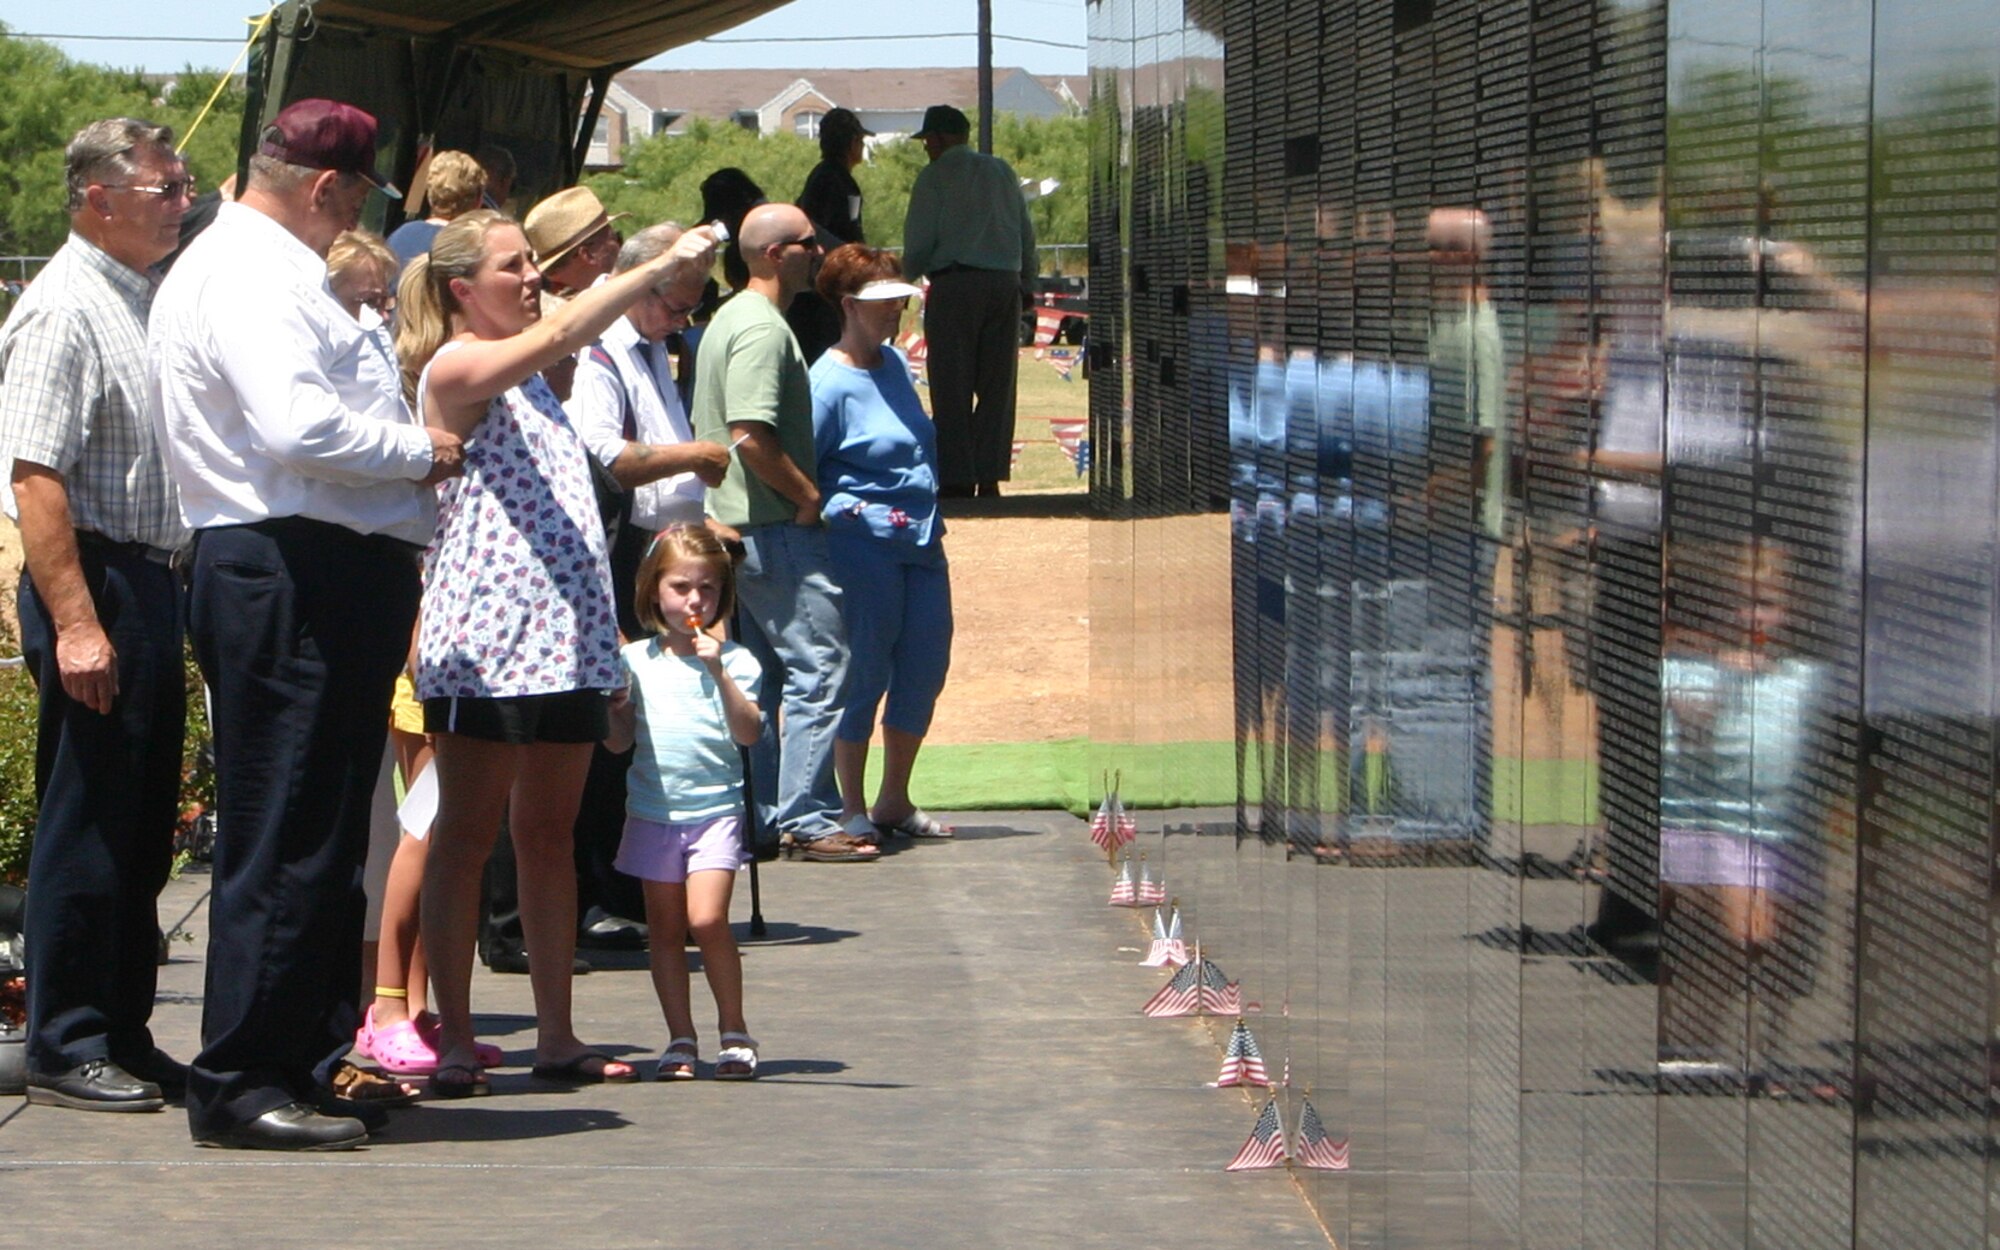 Images of the present merge with those of the past as a family visits the Vietnam Moving Wall Sunday at Crestview Memorial Park in Wichita Falls. The wall is a replica of the Vietnam Veterans Memorial in Washington, D.C. Drivers take the wall around the country to remind those of the lives lost during the Vietnam War. (U.S. Air Force photo/Senior Airman Tonnette Thompson).